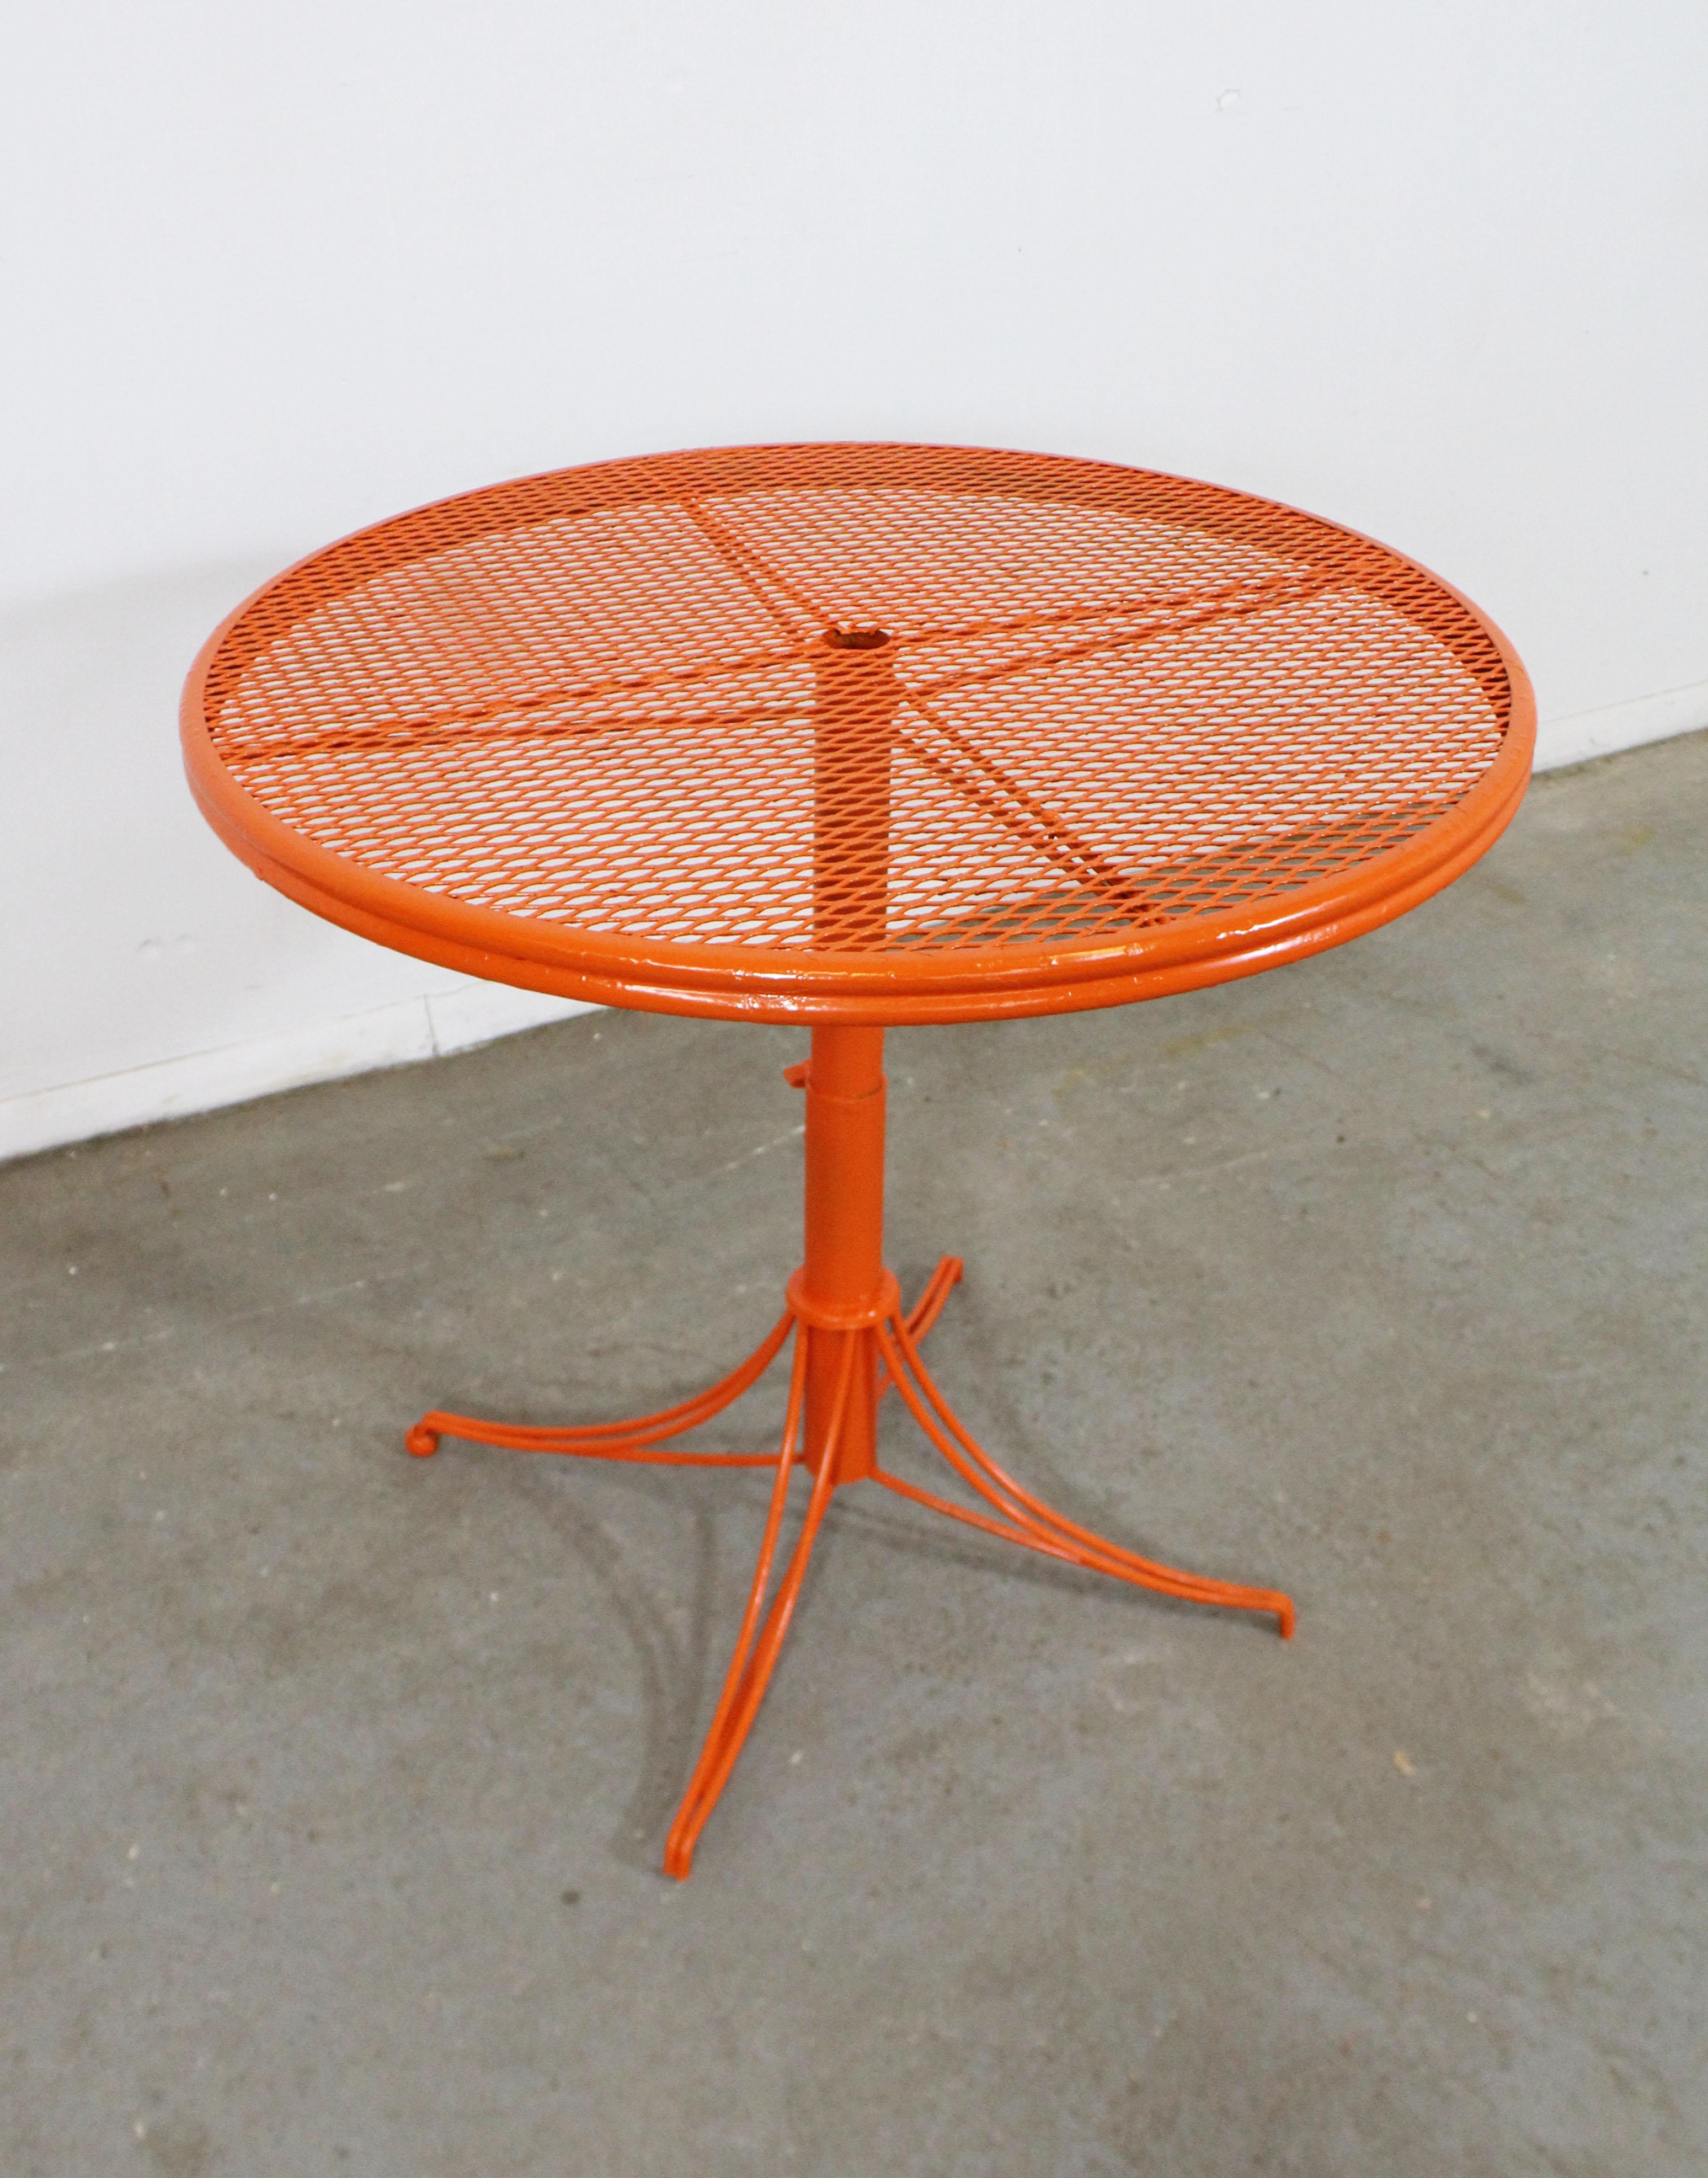 What a find. Offered is a rare Mid-Century Modern outdoor/patio bistro table made by Homecrest Bottemiller, circa 1968. Perfect for outdoor lounging! This piece is made of welded steel and features gracefully styled legs and a mesh top. It is in